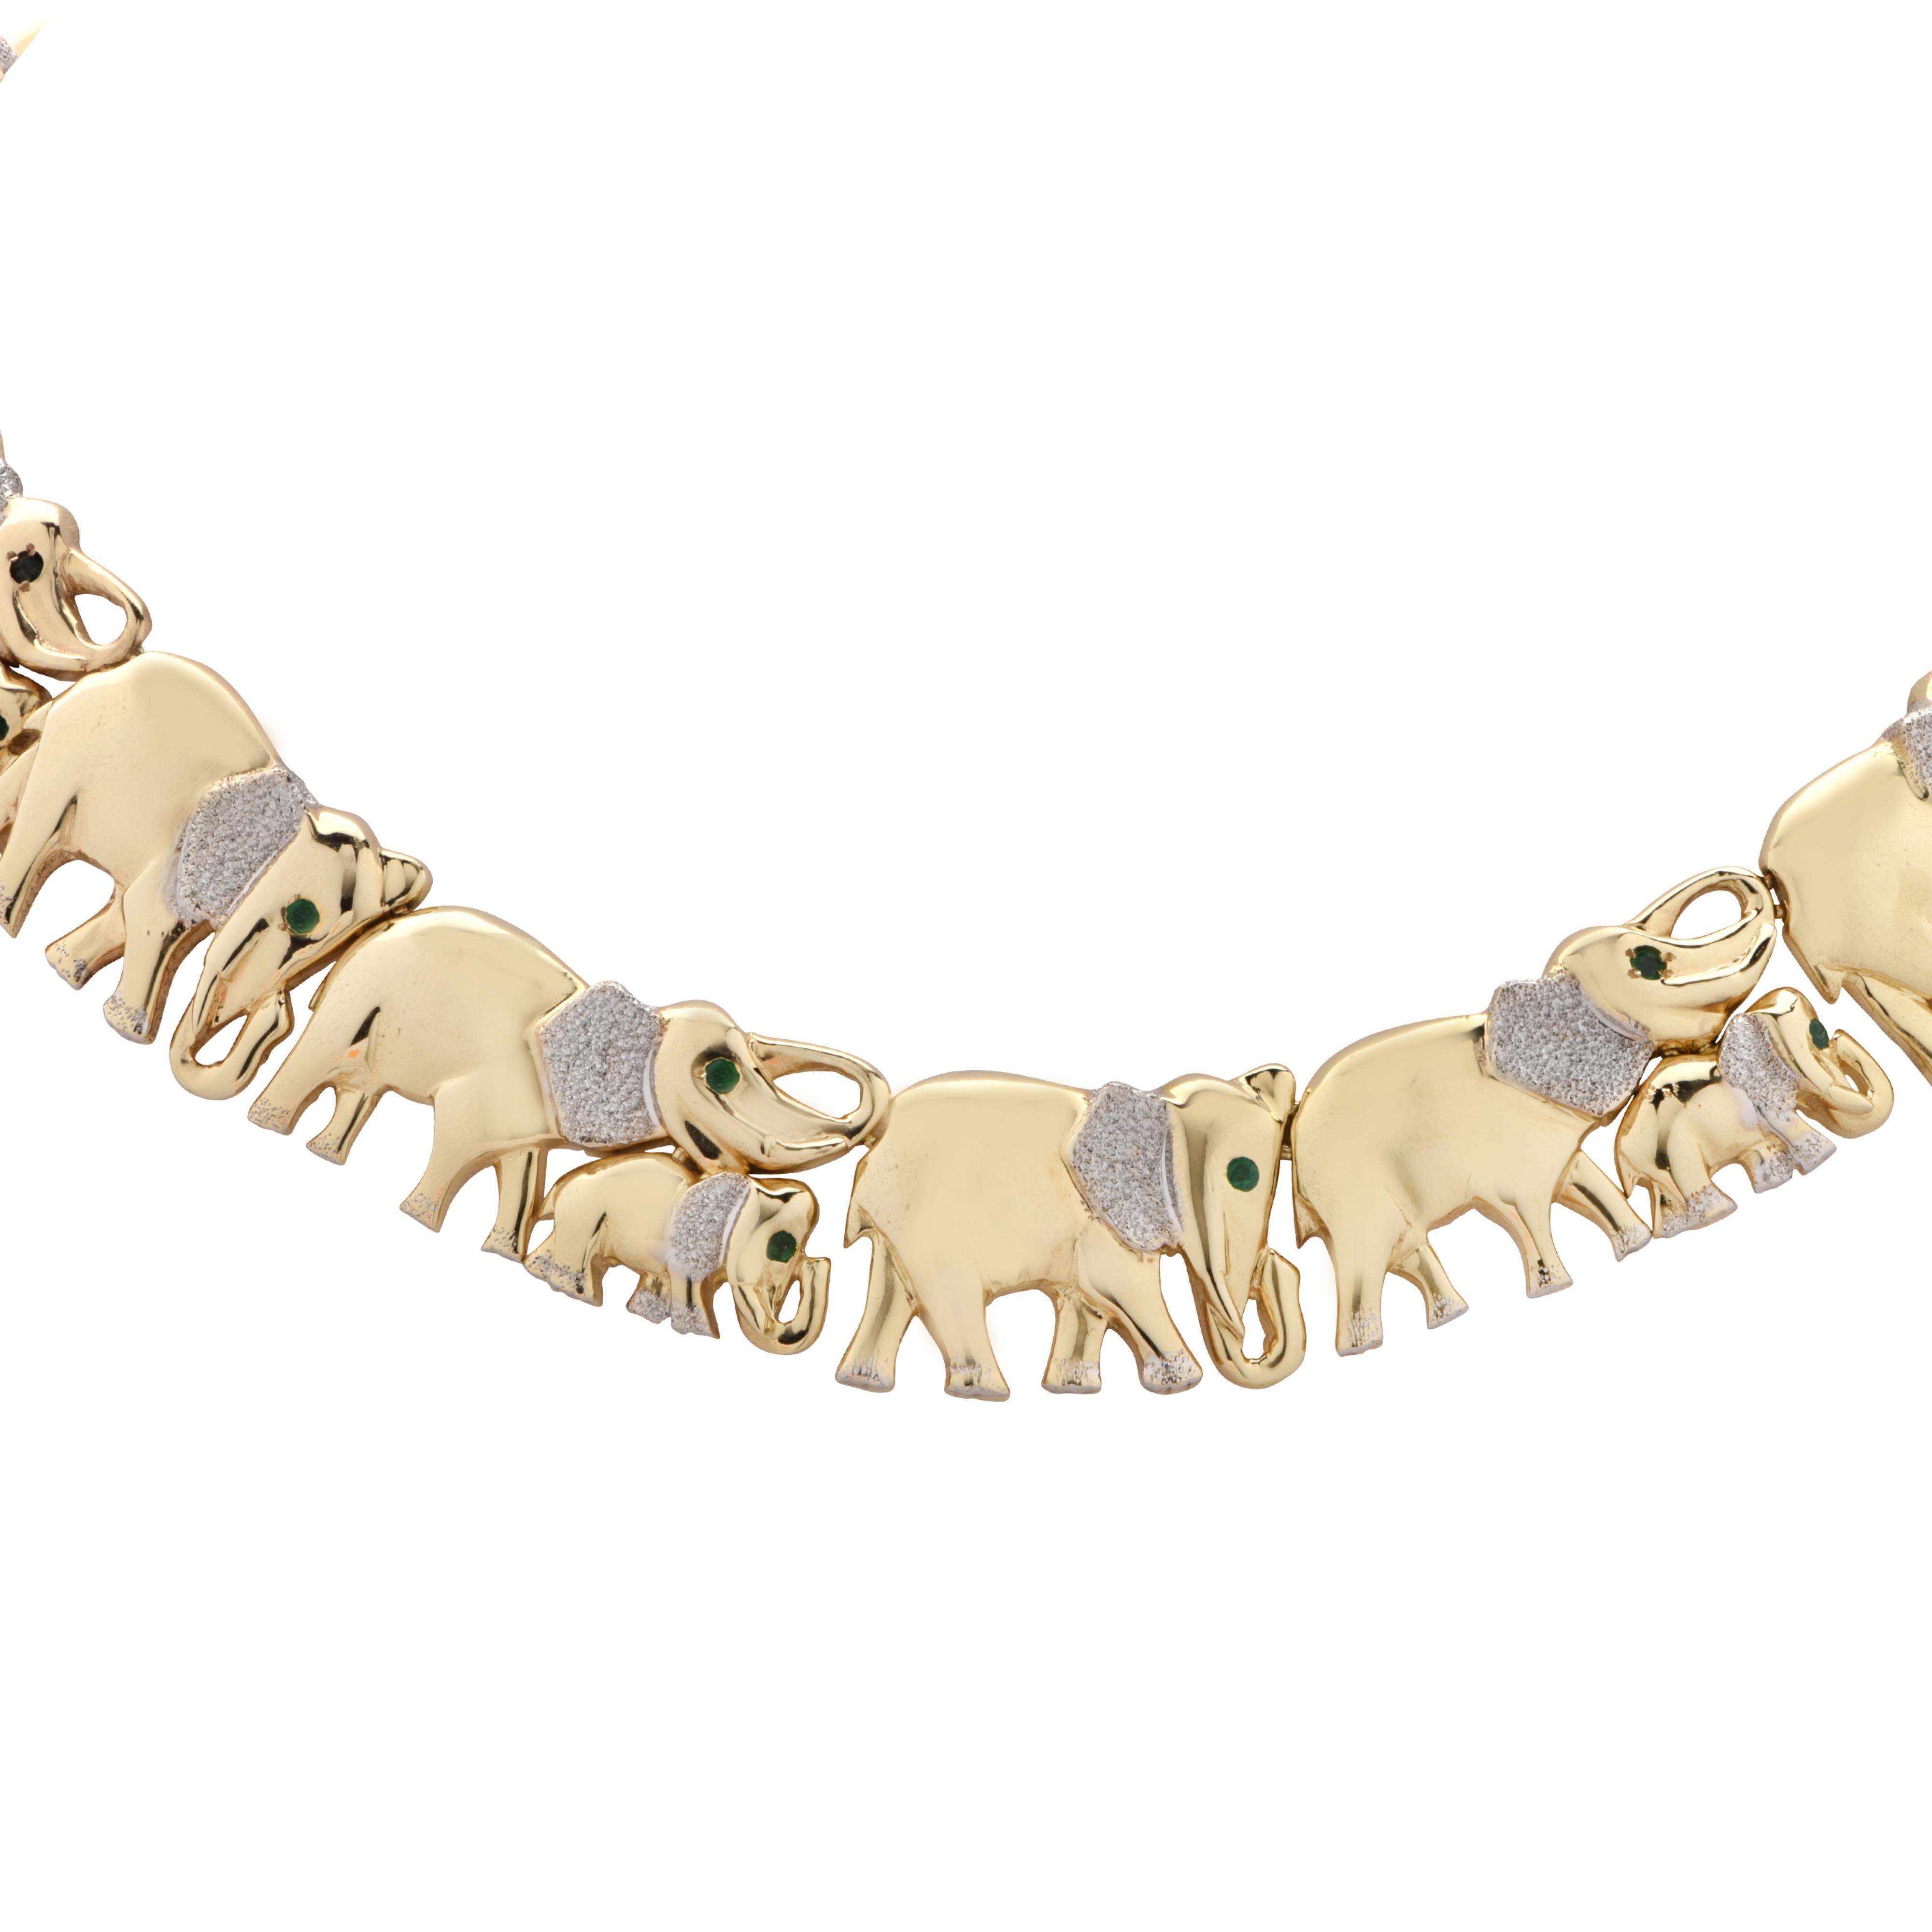 Stunning necklace perfectly depicting a glorious herd of elephants, crafted in yellow gold and detailed with white gold textured ears and feet. The elephants symbolize a deep family bond and loyalty. This delightful necklace measures .7 inches in